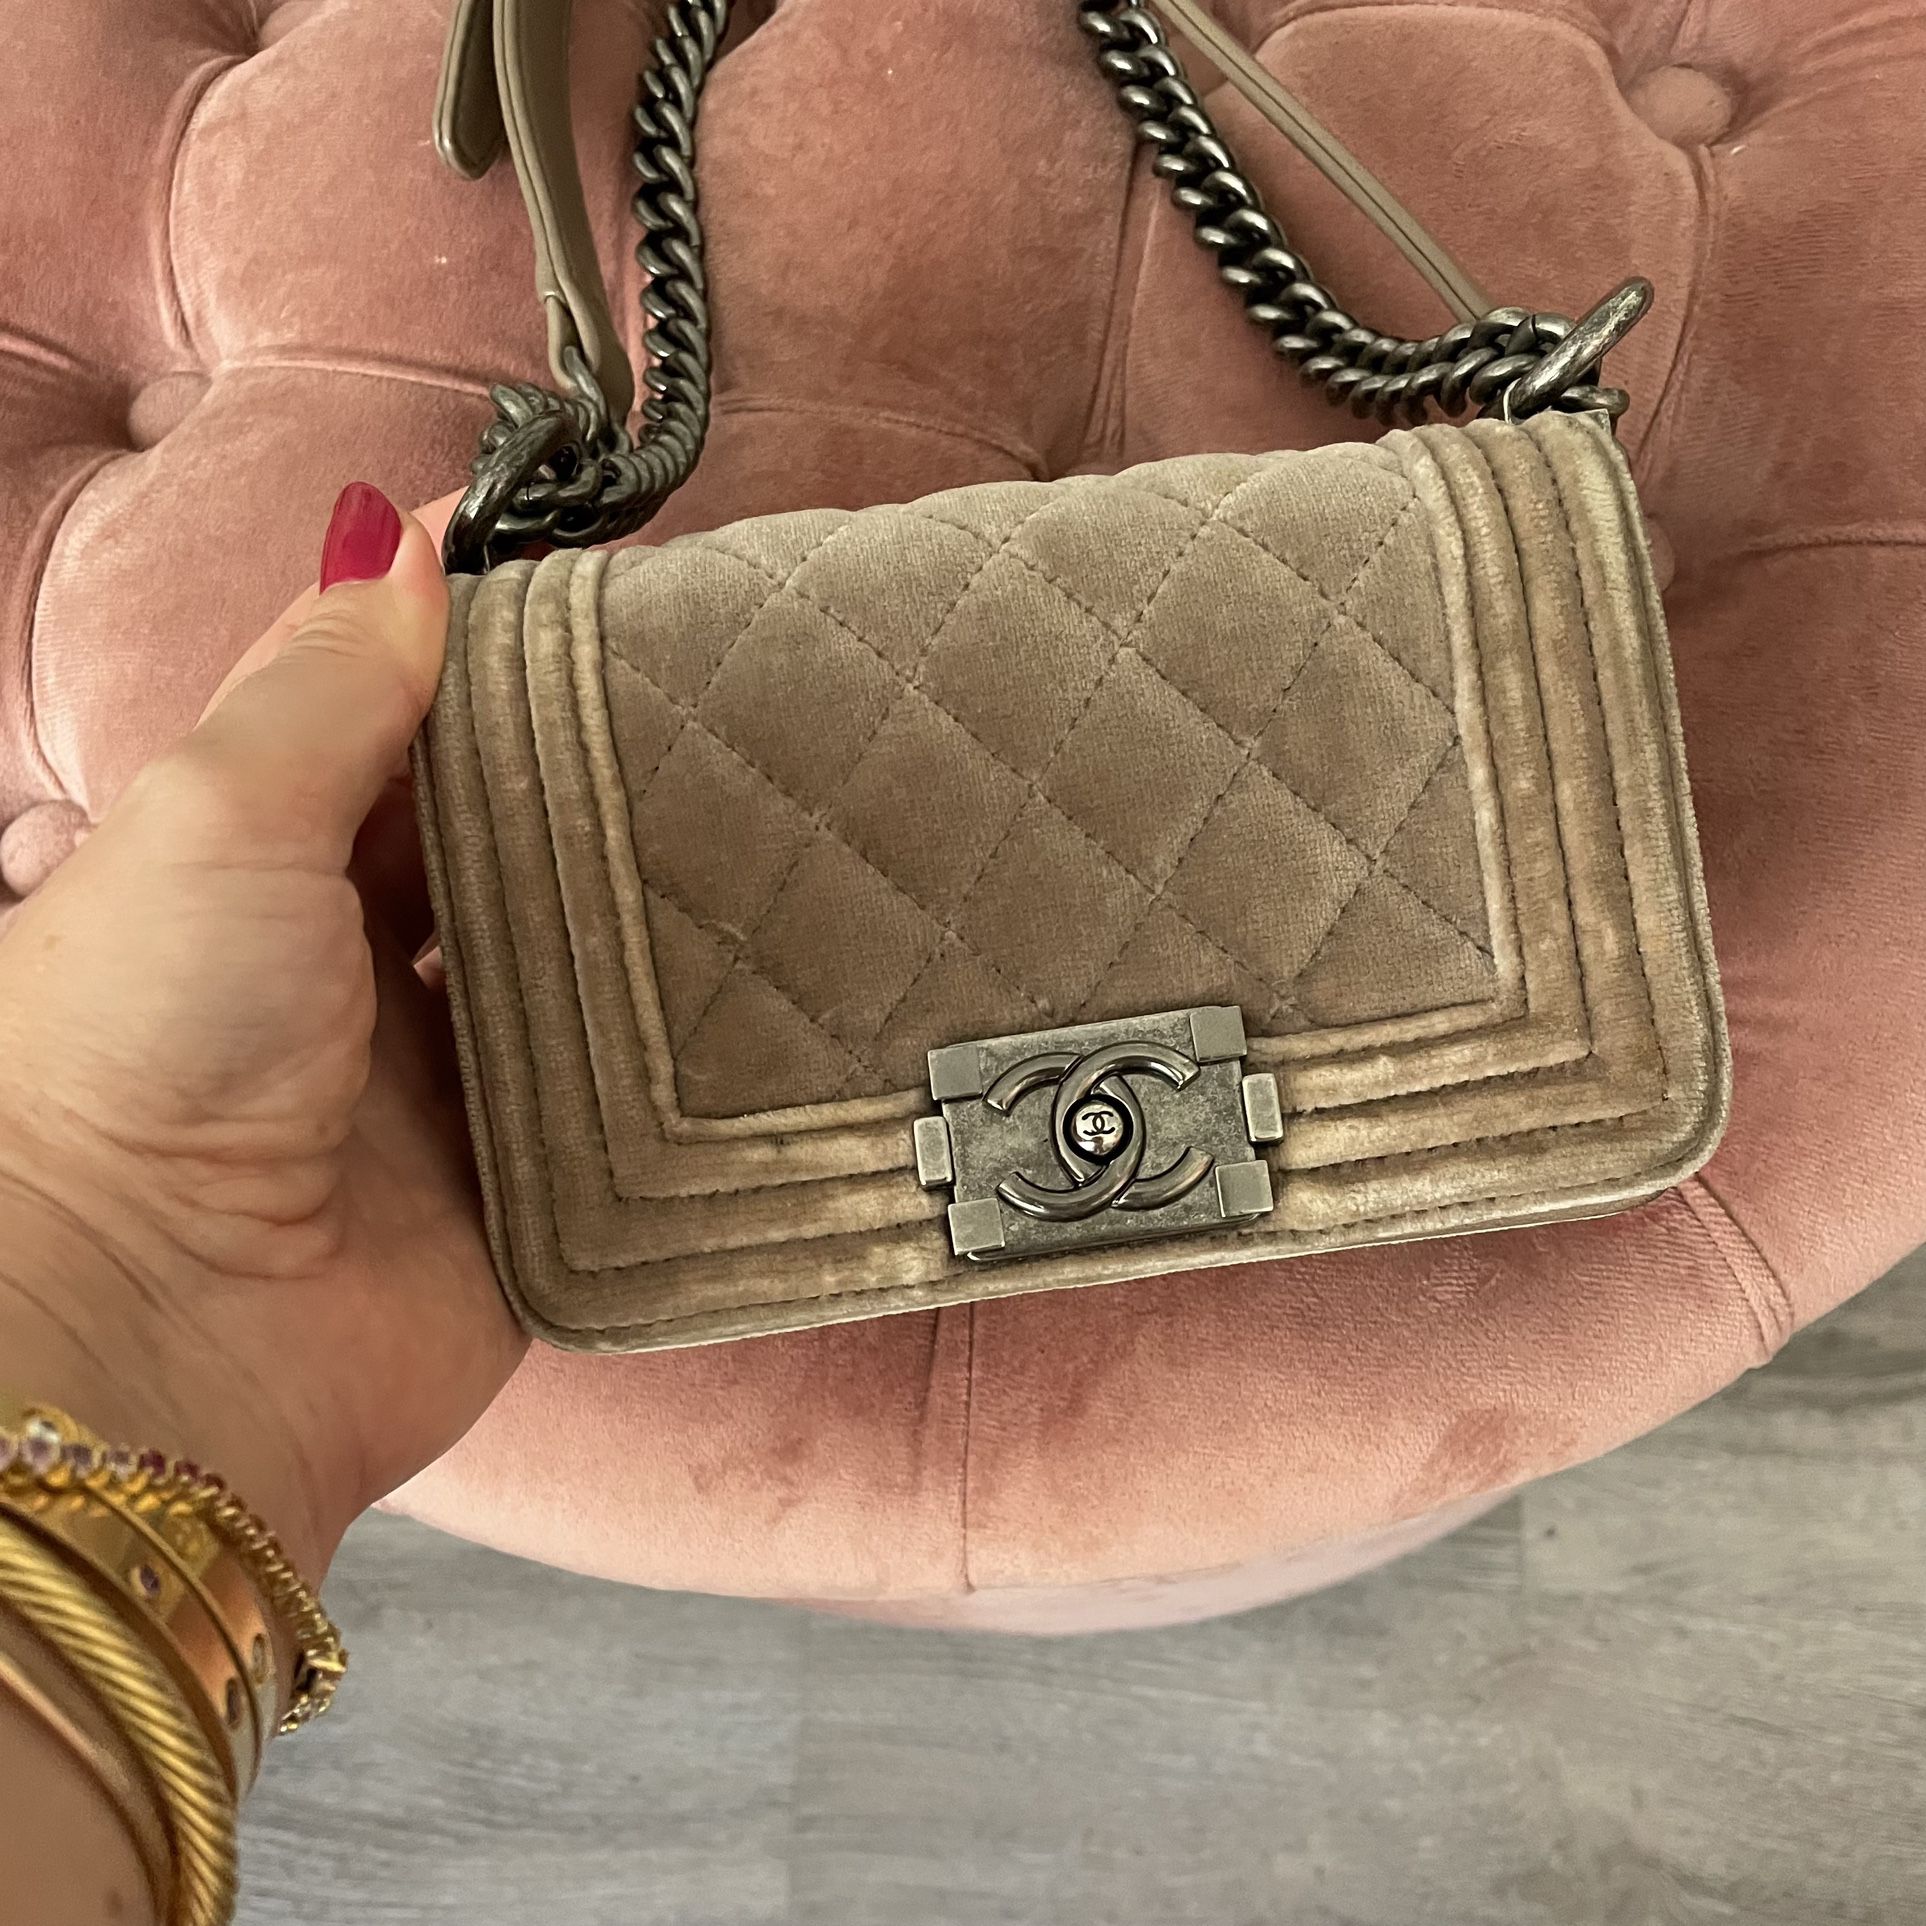 Authentic Chanel Boy Bag ( snake skin) for Sale in HUNTINGTN BCH, CA -  OfferUp